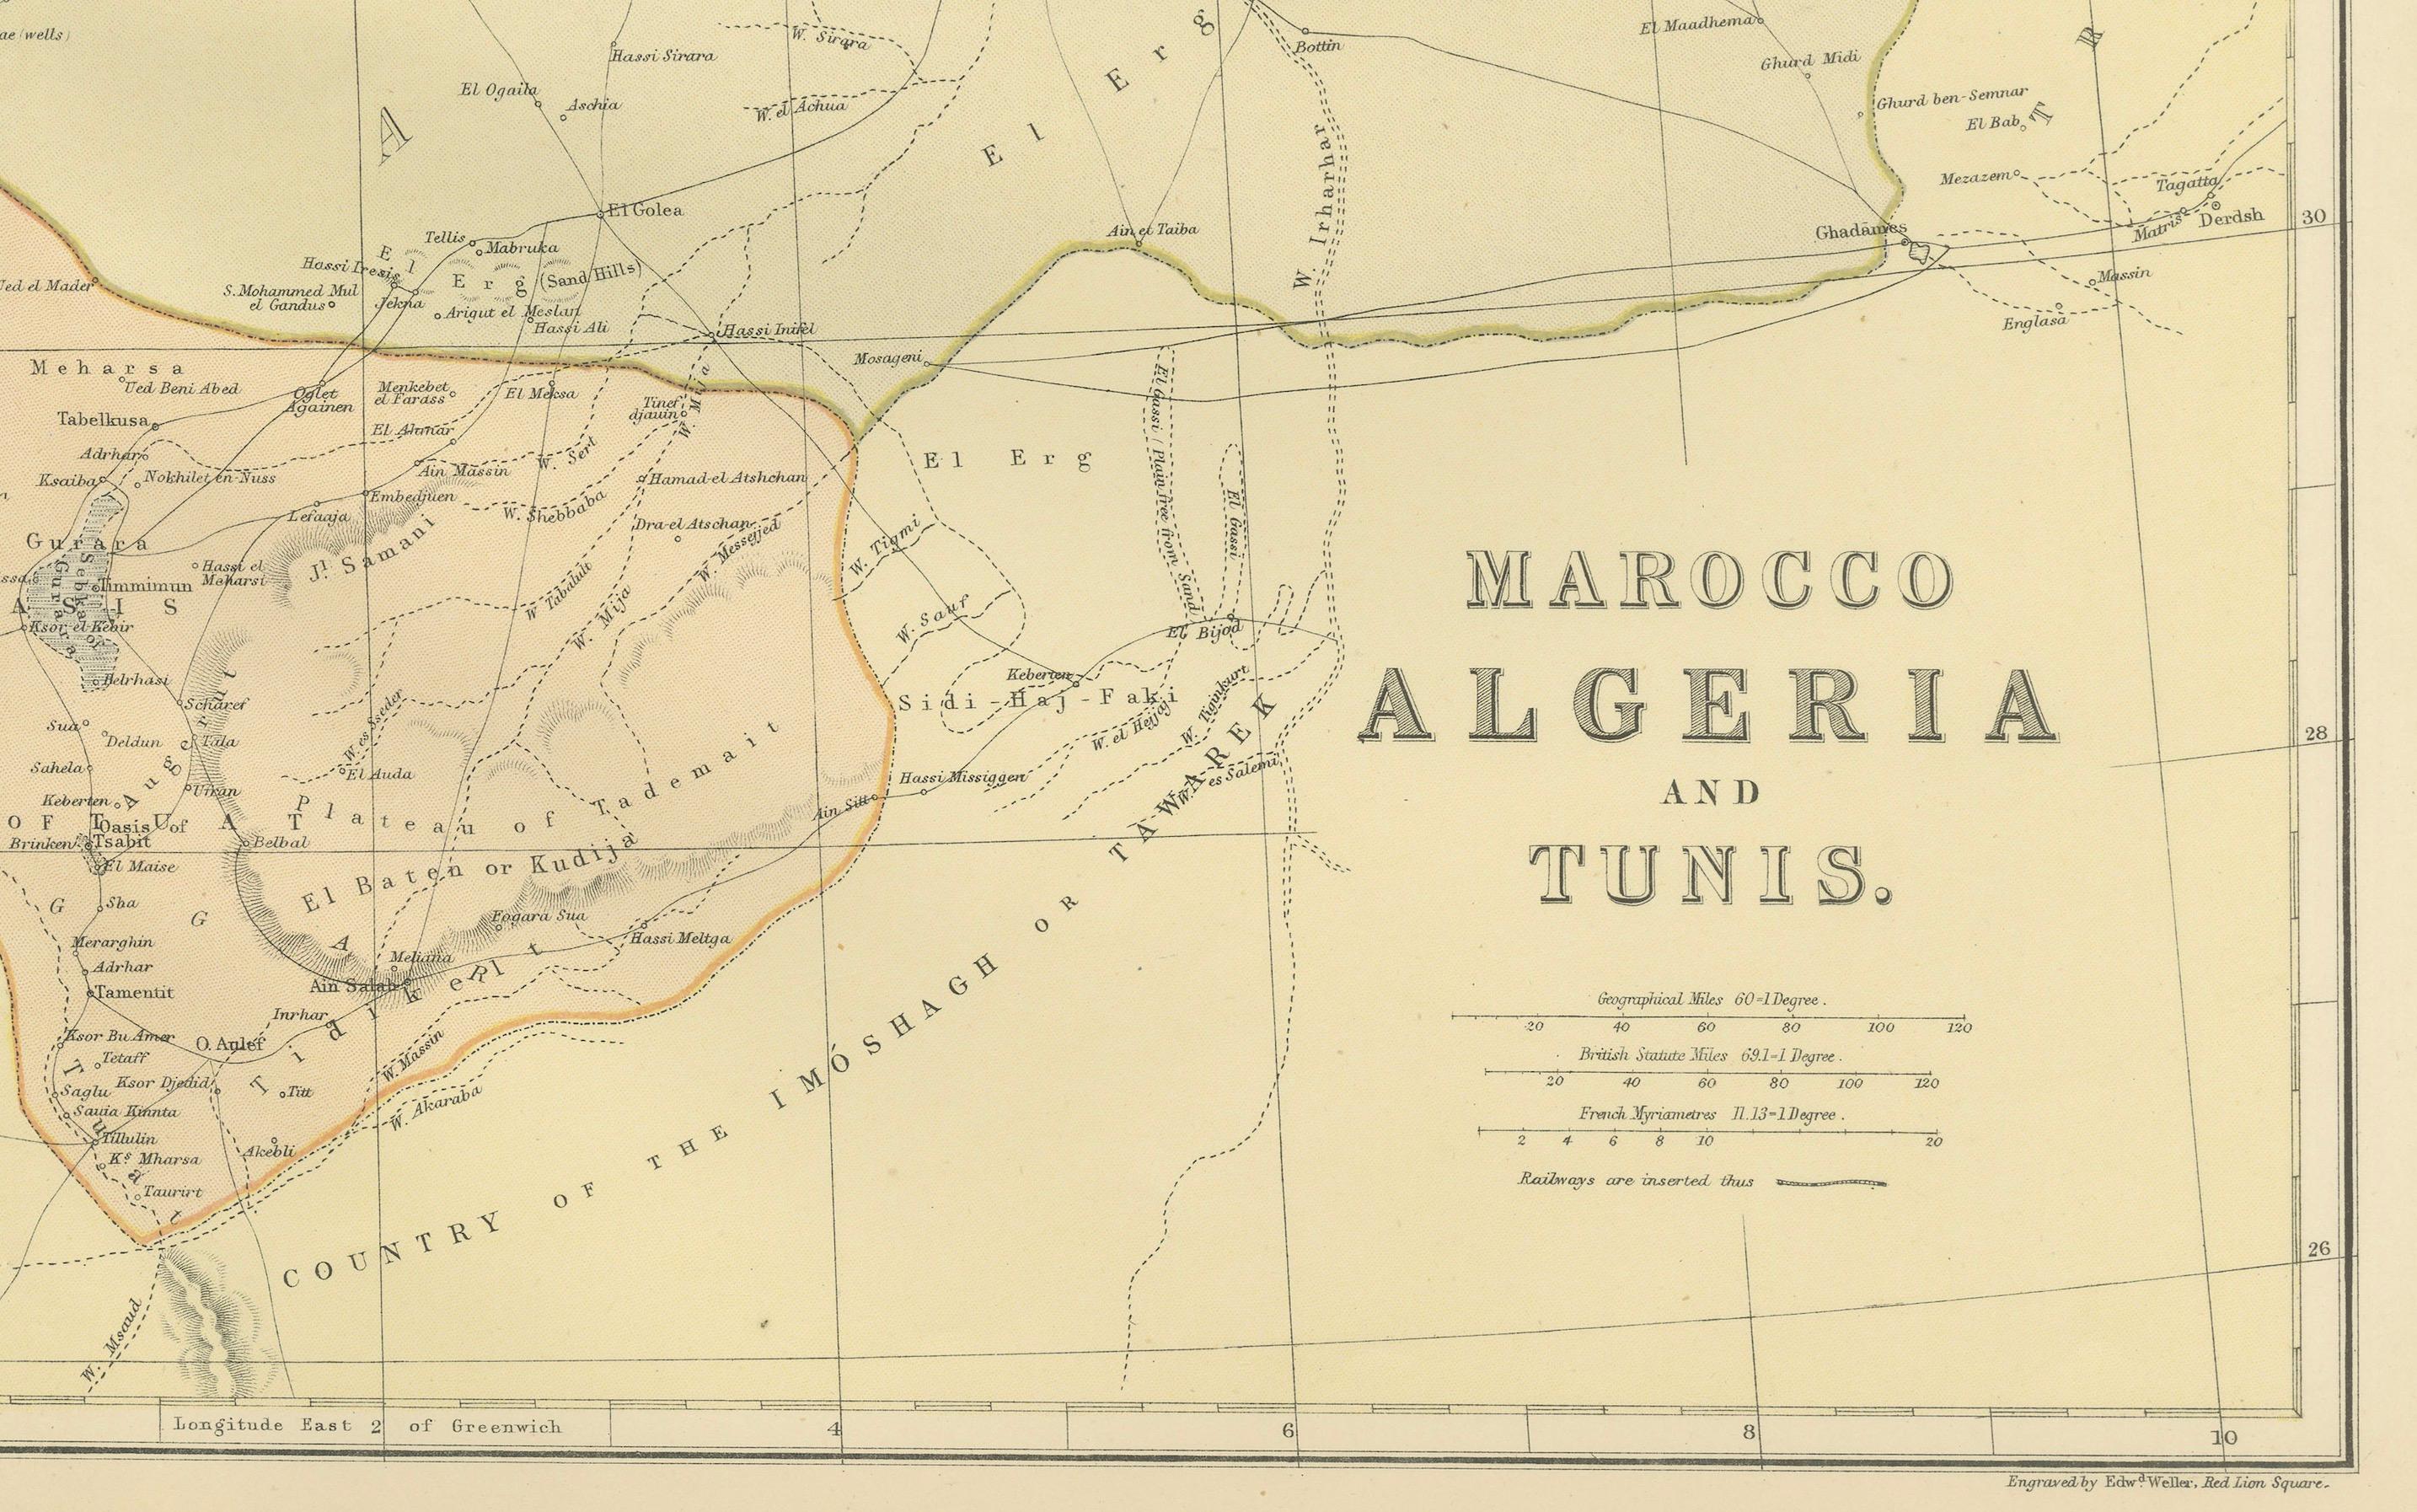 The  maps is from the 1882 atlas by Blackie & Son and offers a detailed view of the North African regions as understood in the late 19th century. 

**Map of Morocco, Algeria, and Tunis:**
This map details the North African coast from Morocco to